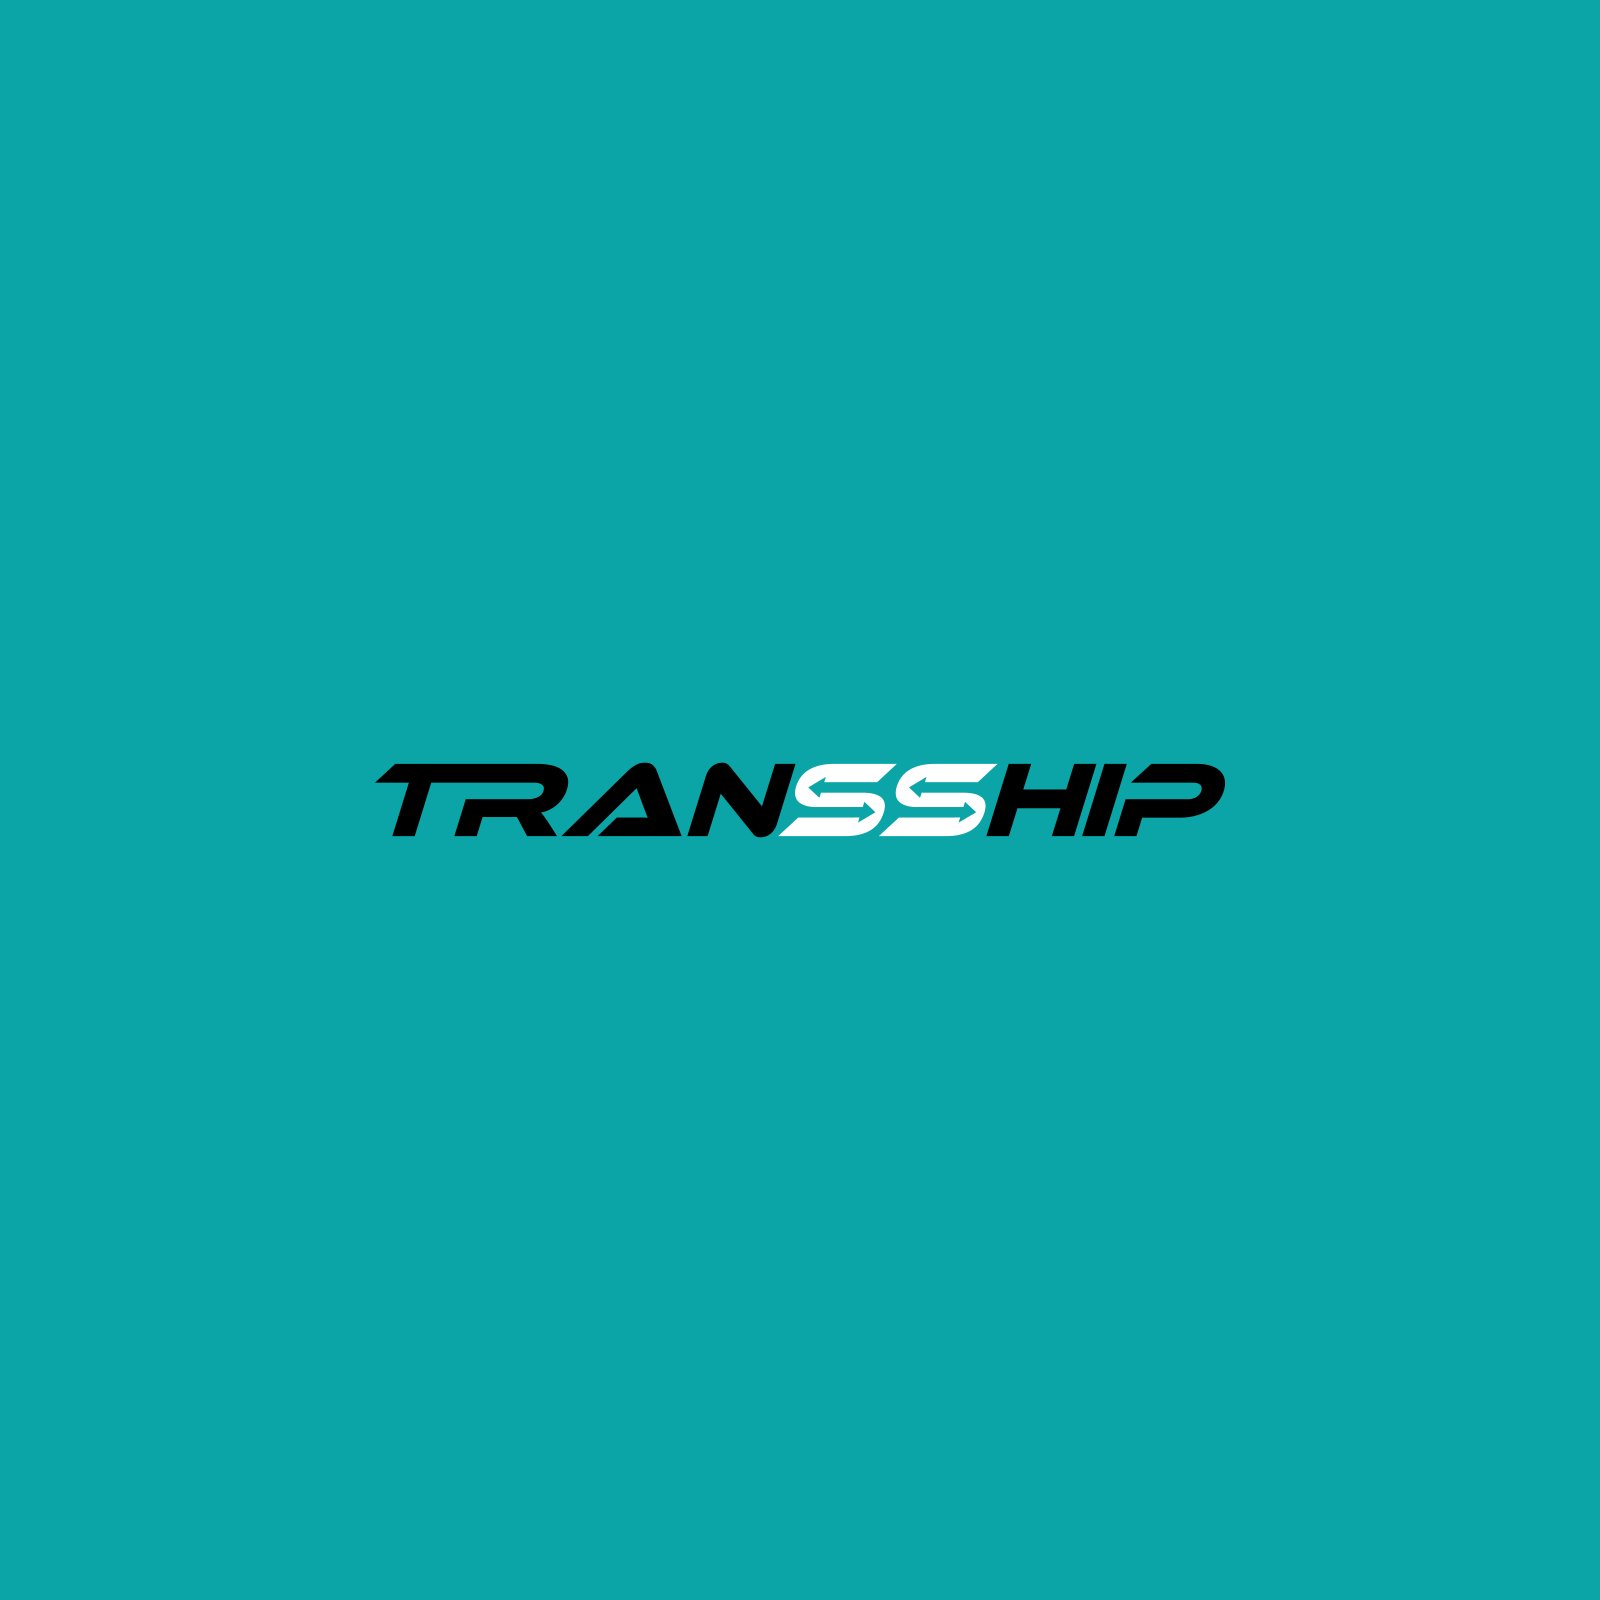 Transship is a company that specializes in automating freight forwarding of perishable goods. You can book shipments with us in as little as a few seconds.